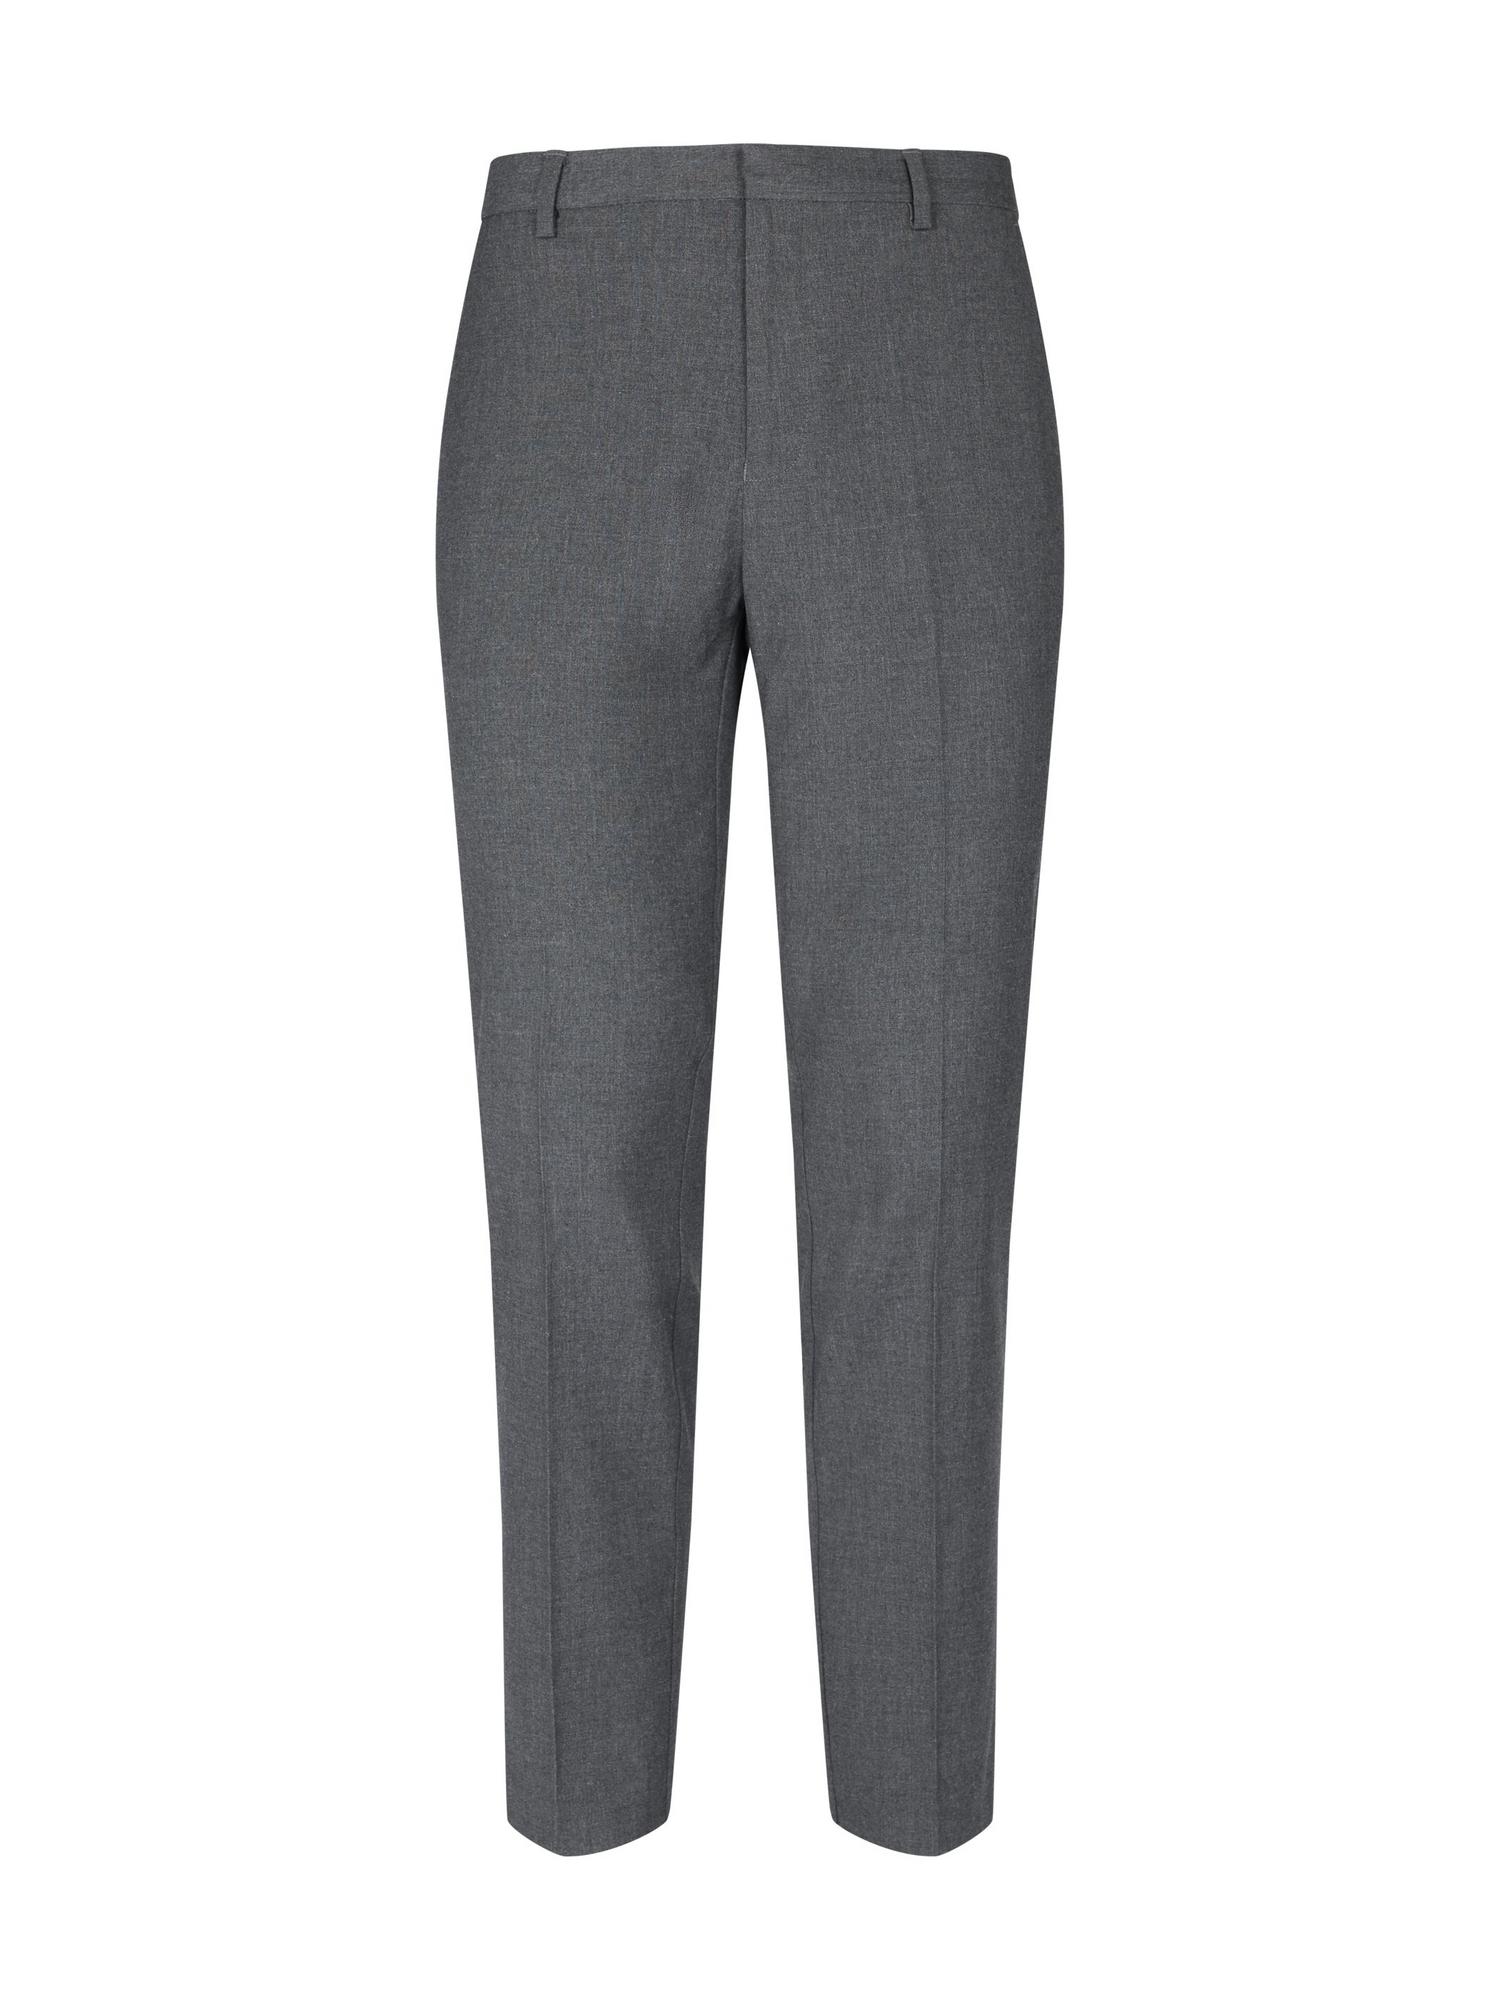 Mid Grey Skinny Fit Trousers With Recycled Polyest | Burton UK